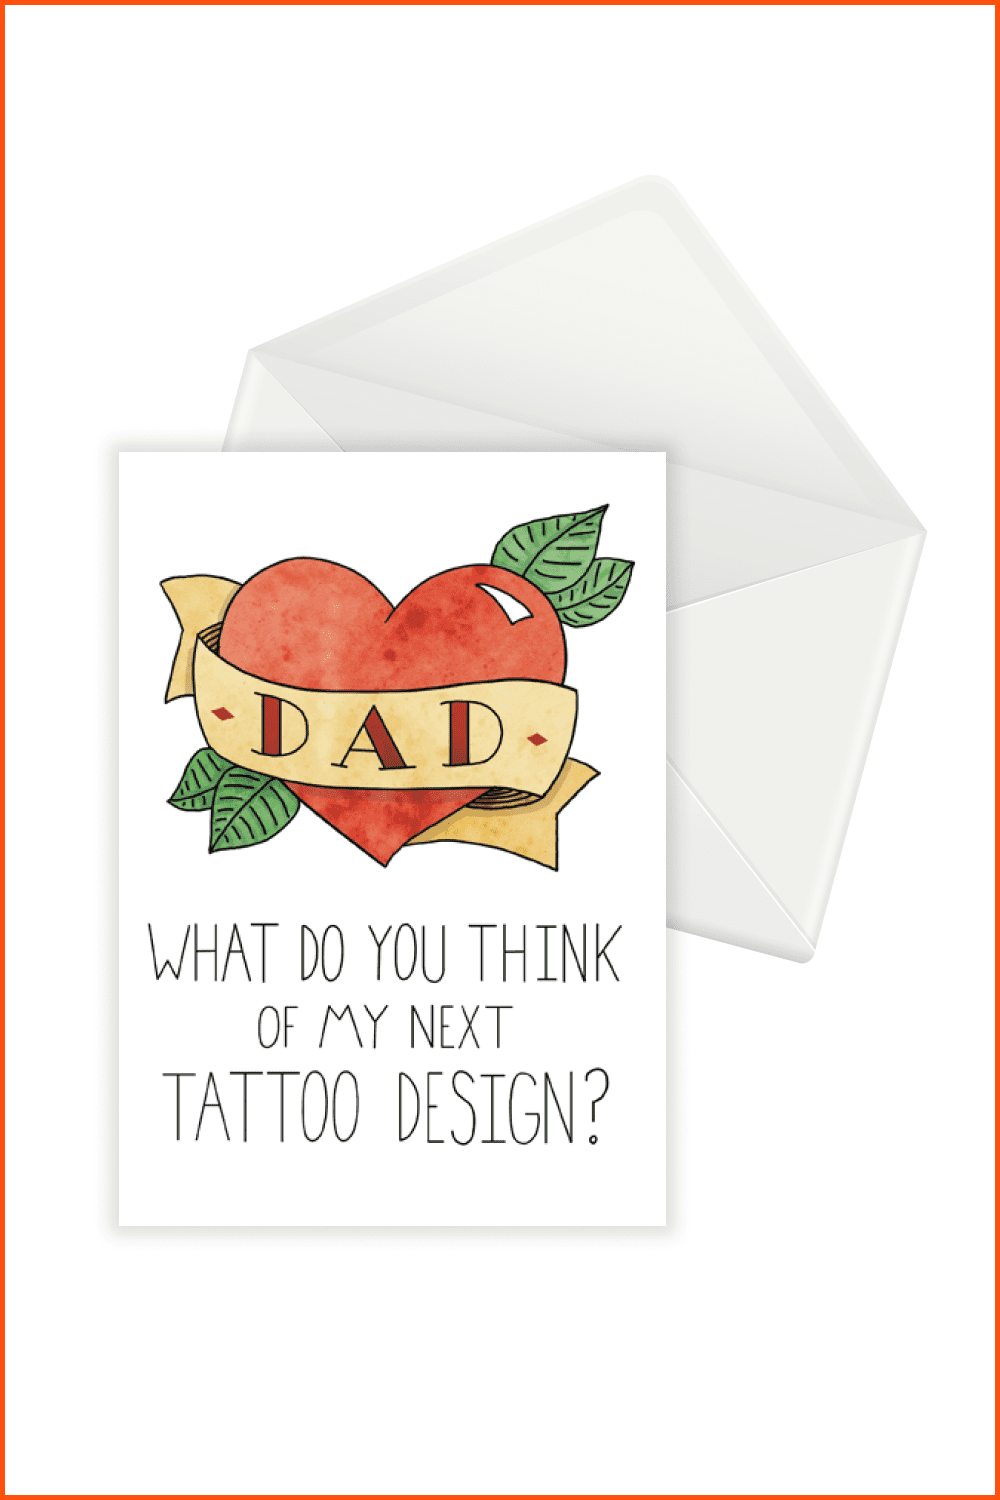 Dad Tattoo eCard Designed by Claire Lordon.